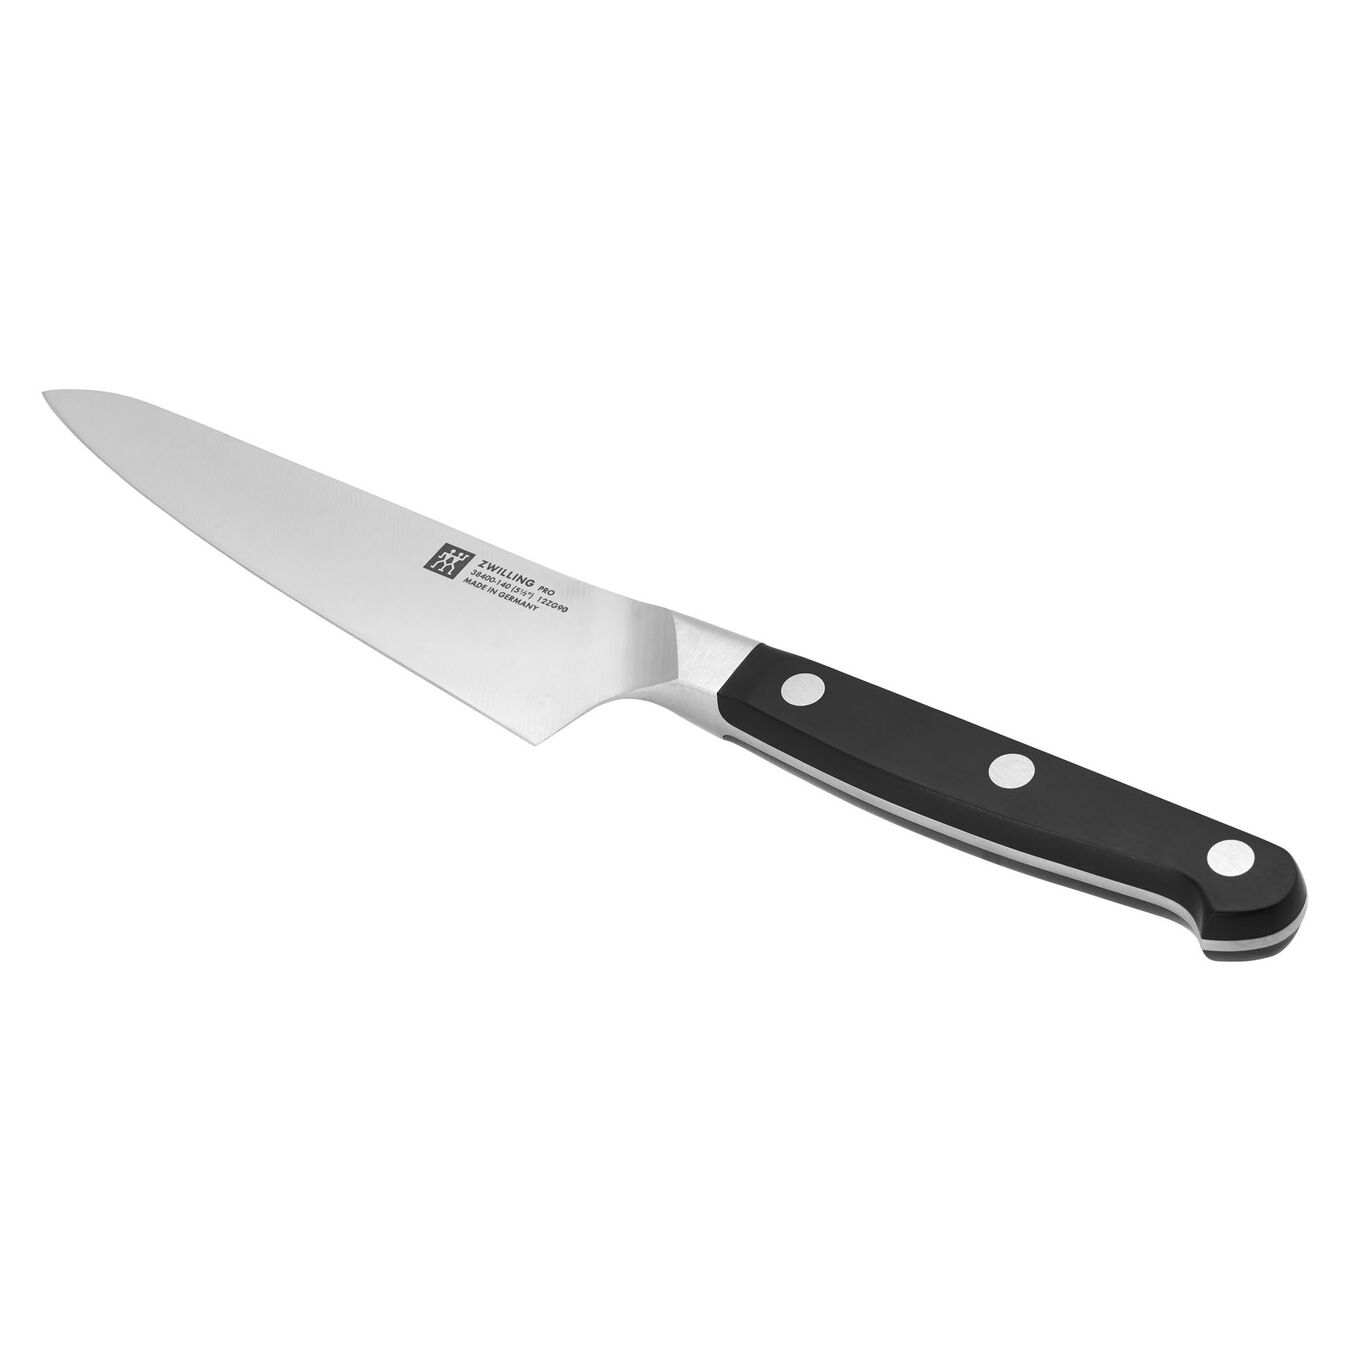 5.5-inch Chef's knife compact, Fine Edge  - Visual Imperfections,,large 3